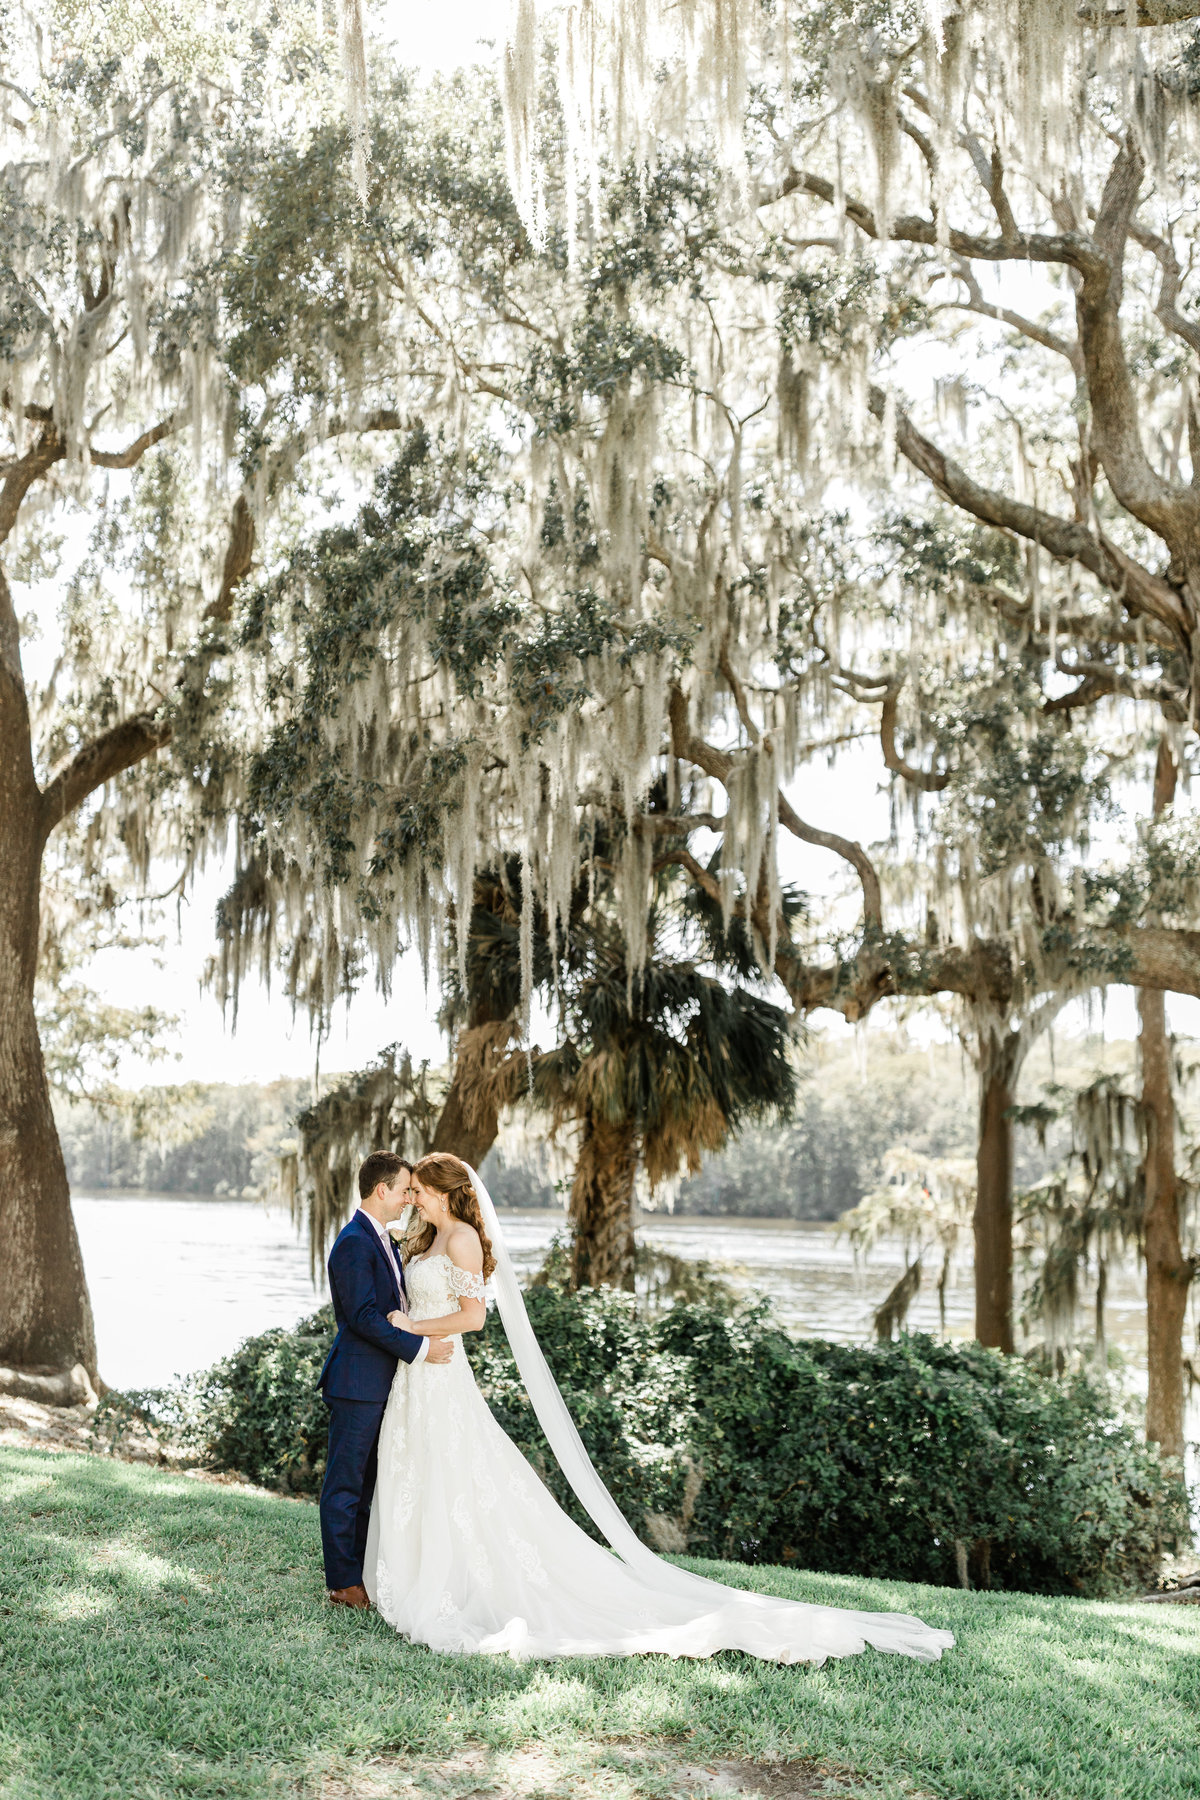 Spanish moss can make for a stunning backdrop.